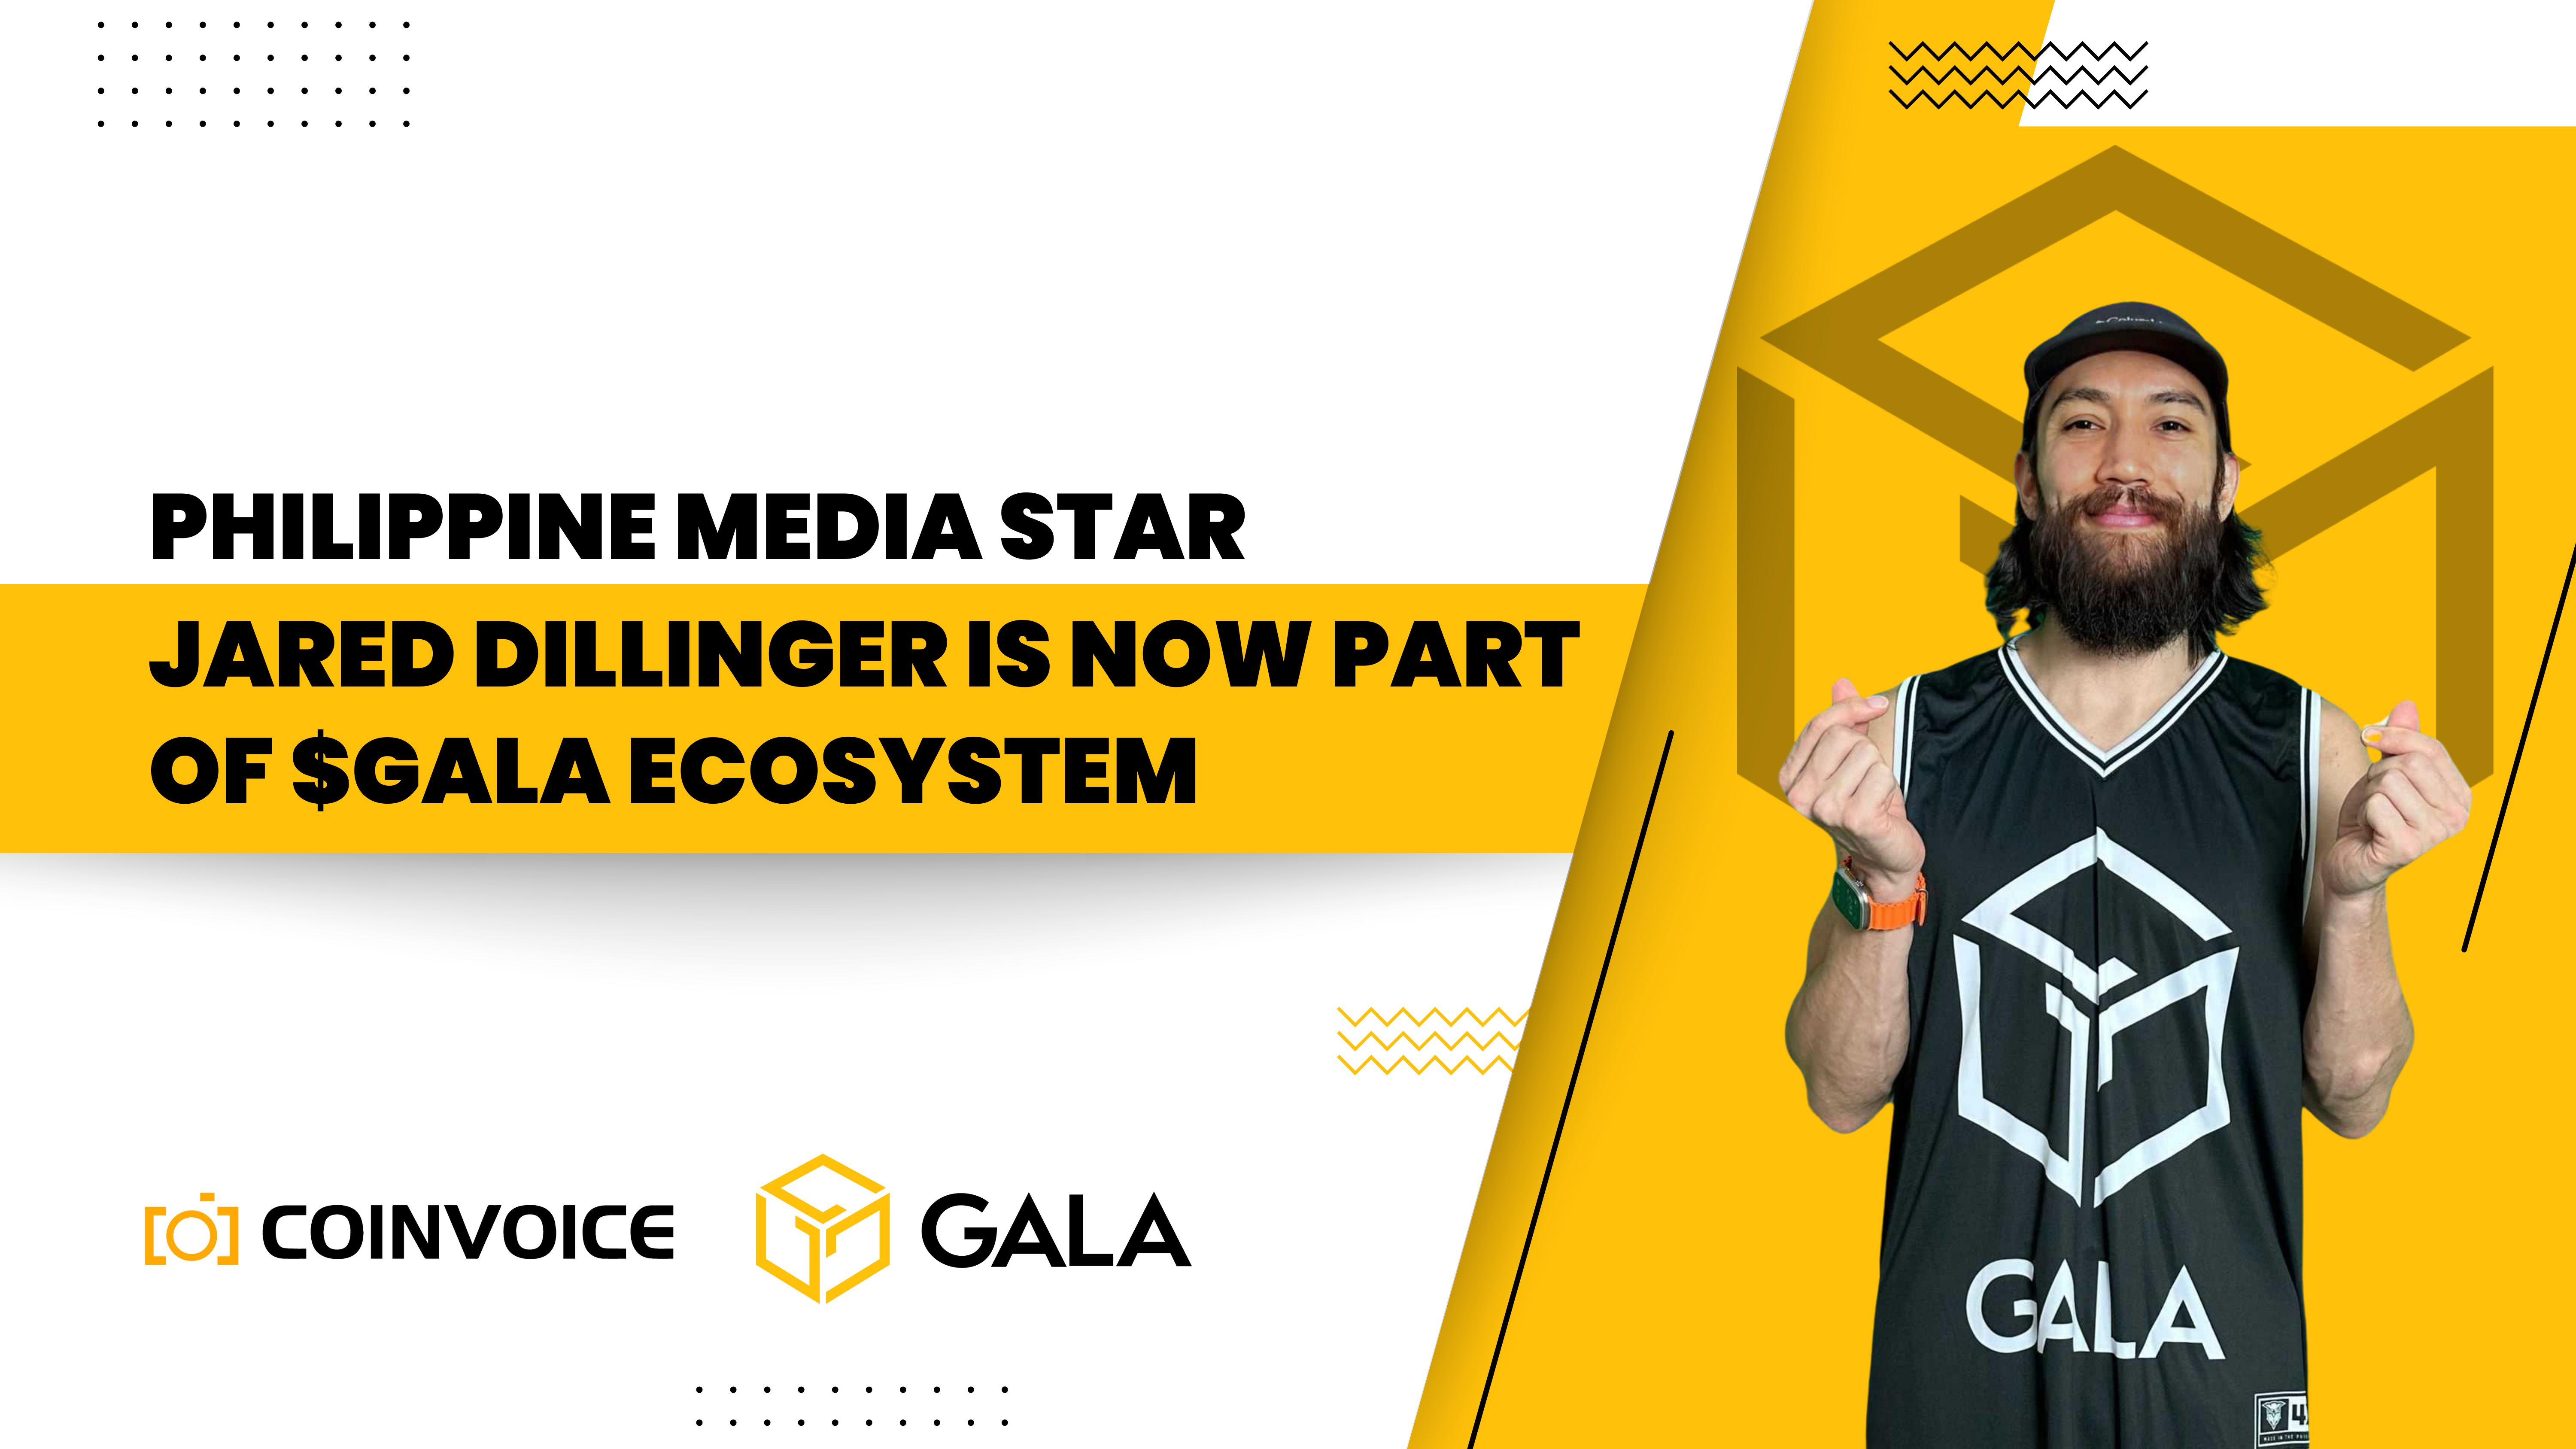 Philippine Media Star Jared Dillinger is Now Part of the $GALA Ecosystem